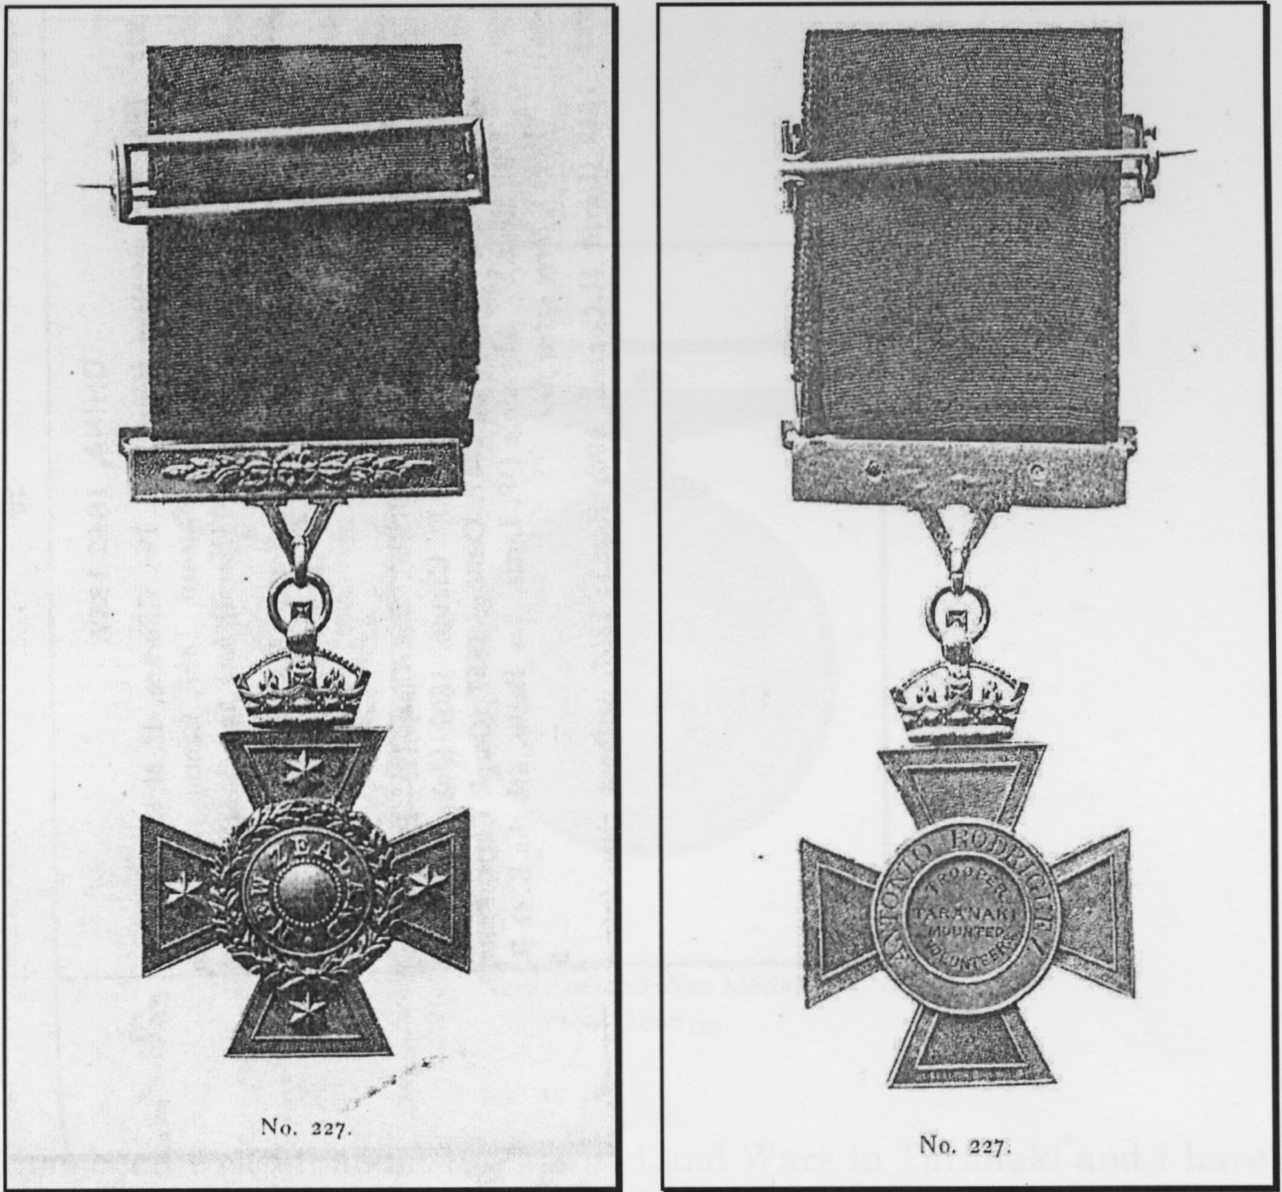 Illustration of Rodriquez's New Zealand Cross from the auction catalogue of the Sotheby's sale of 1910